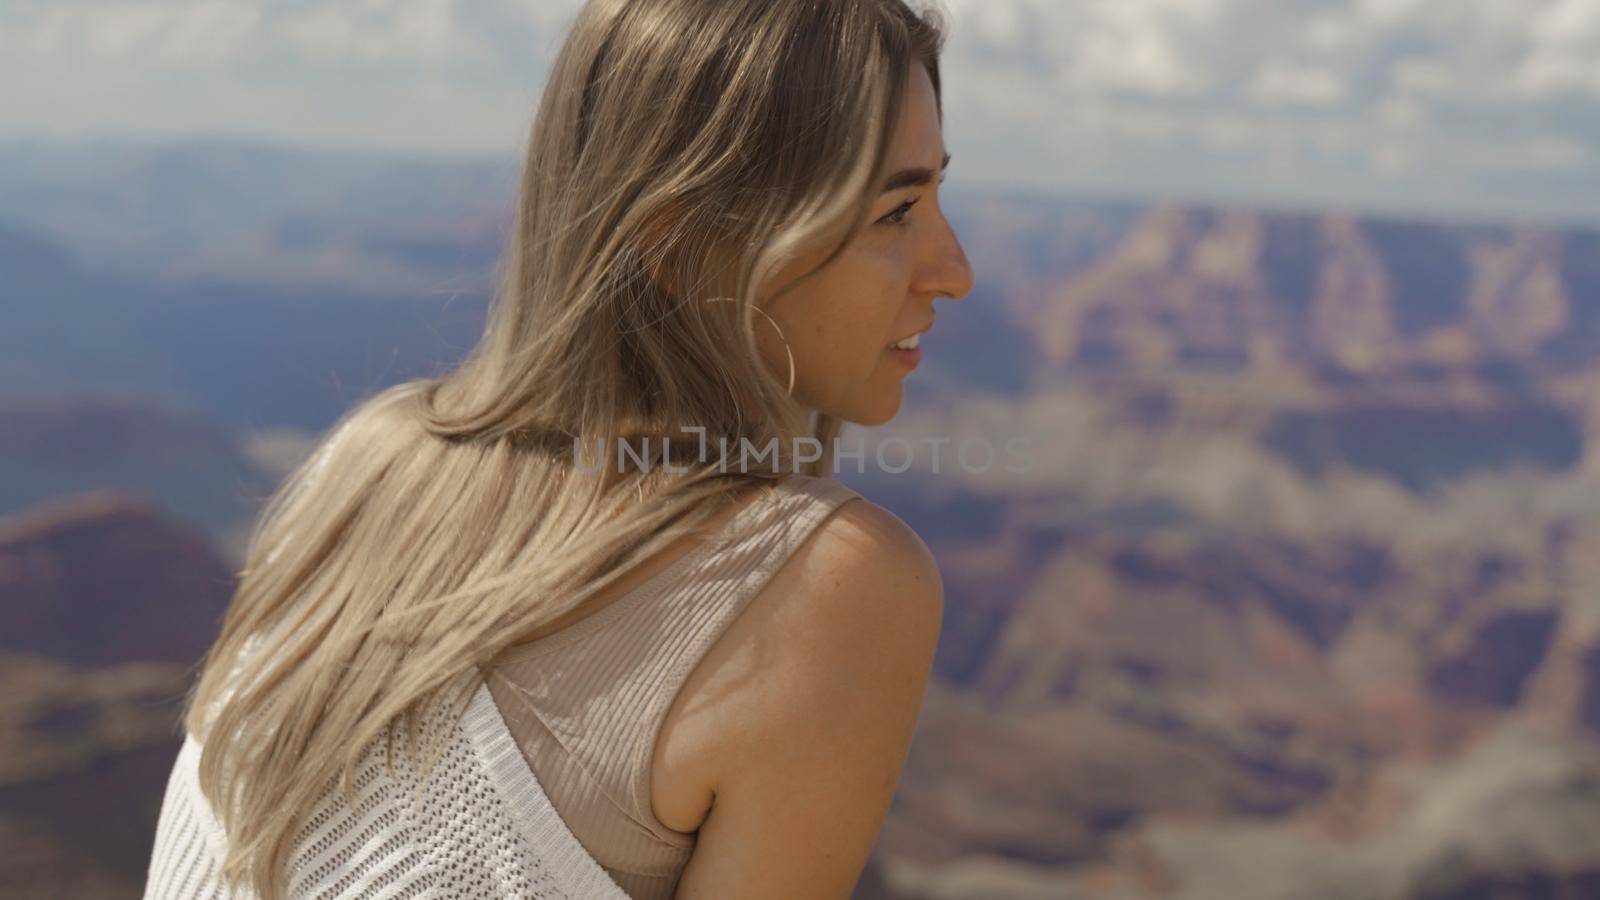 A young woman looking to Horseshoe Bend and Colorado river from the edge of 1000ft canyon in Glen Canyon National Recreation Area, Arizona, USA